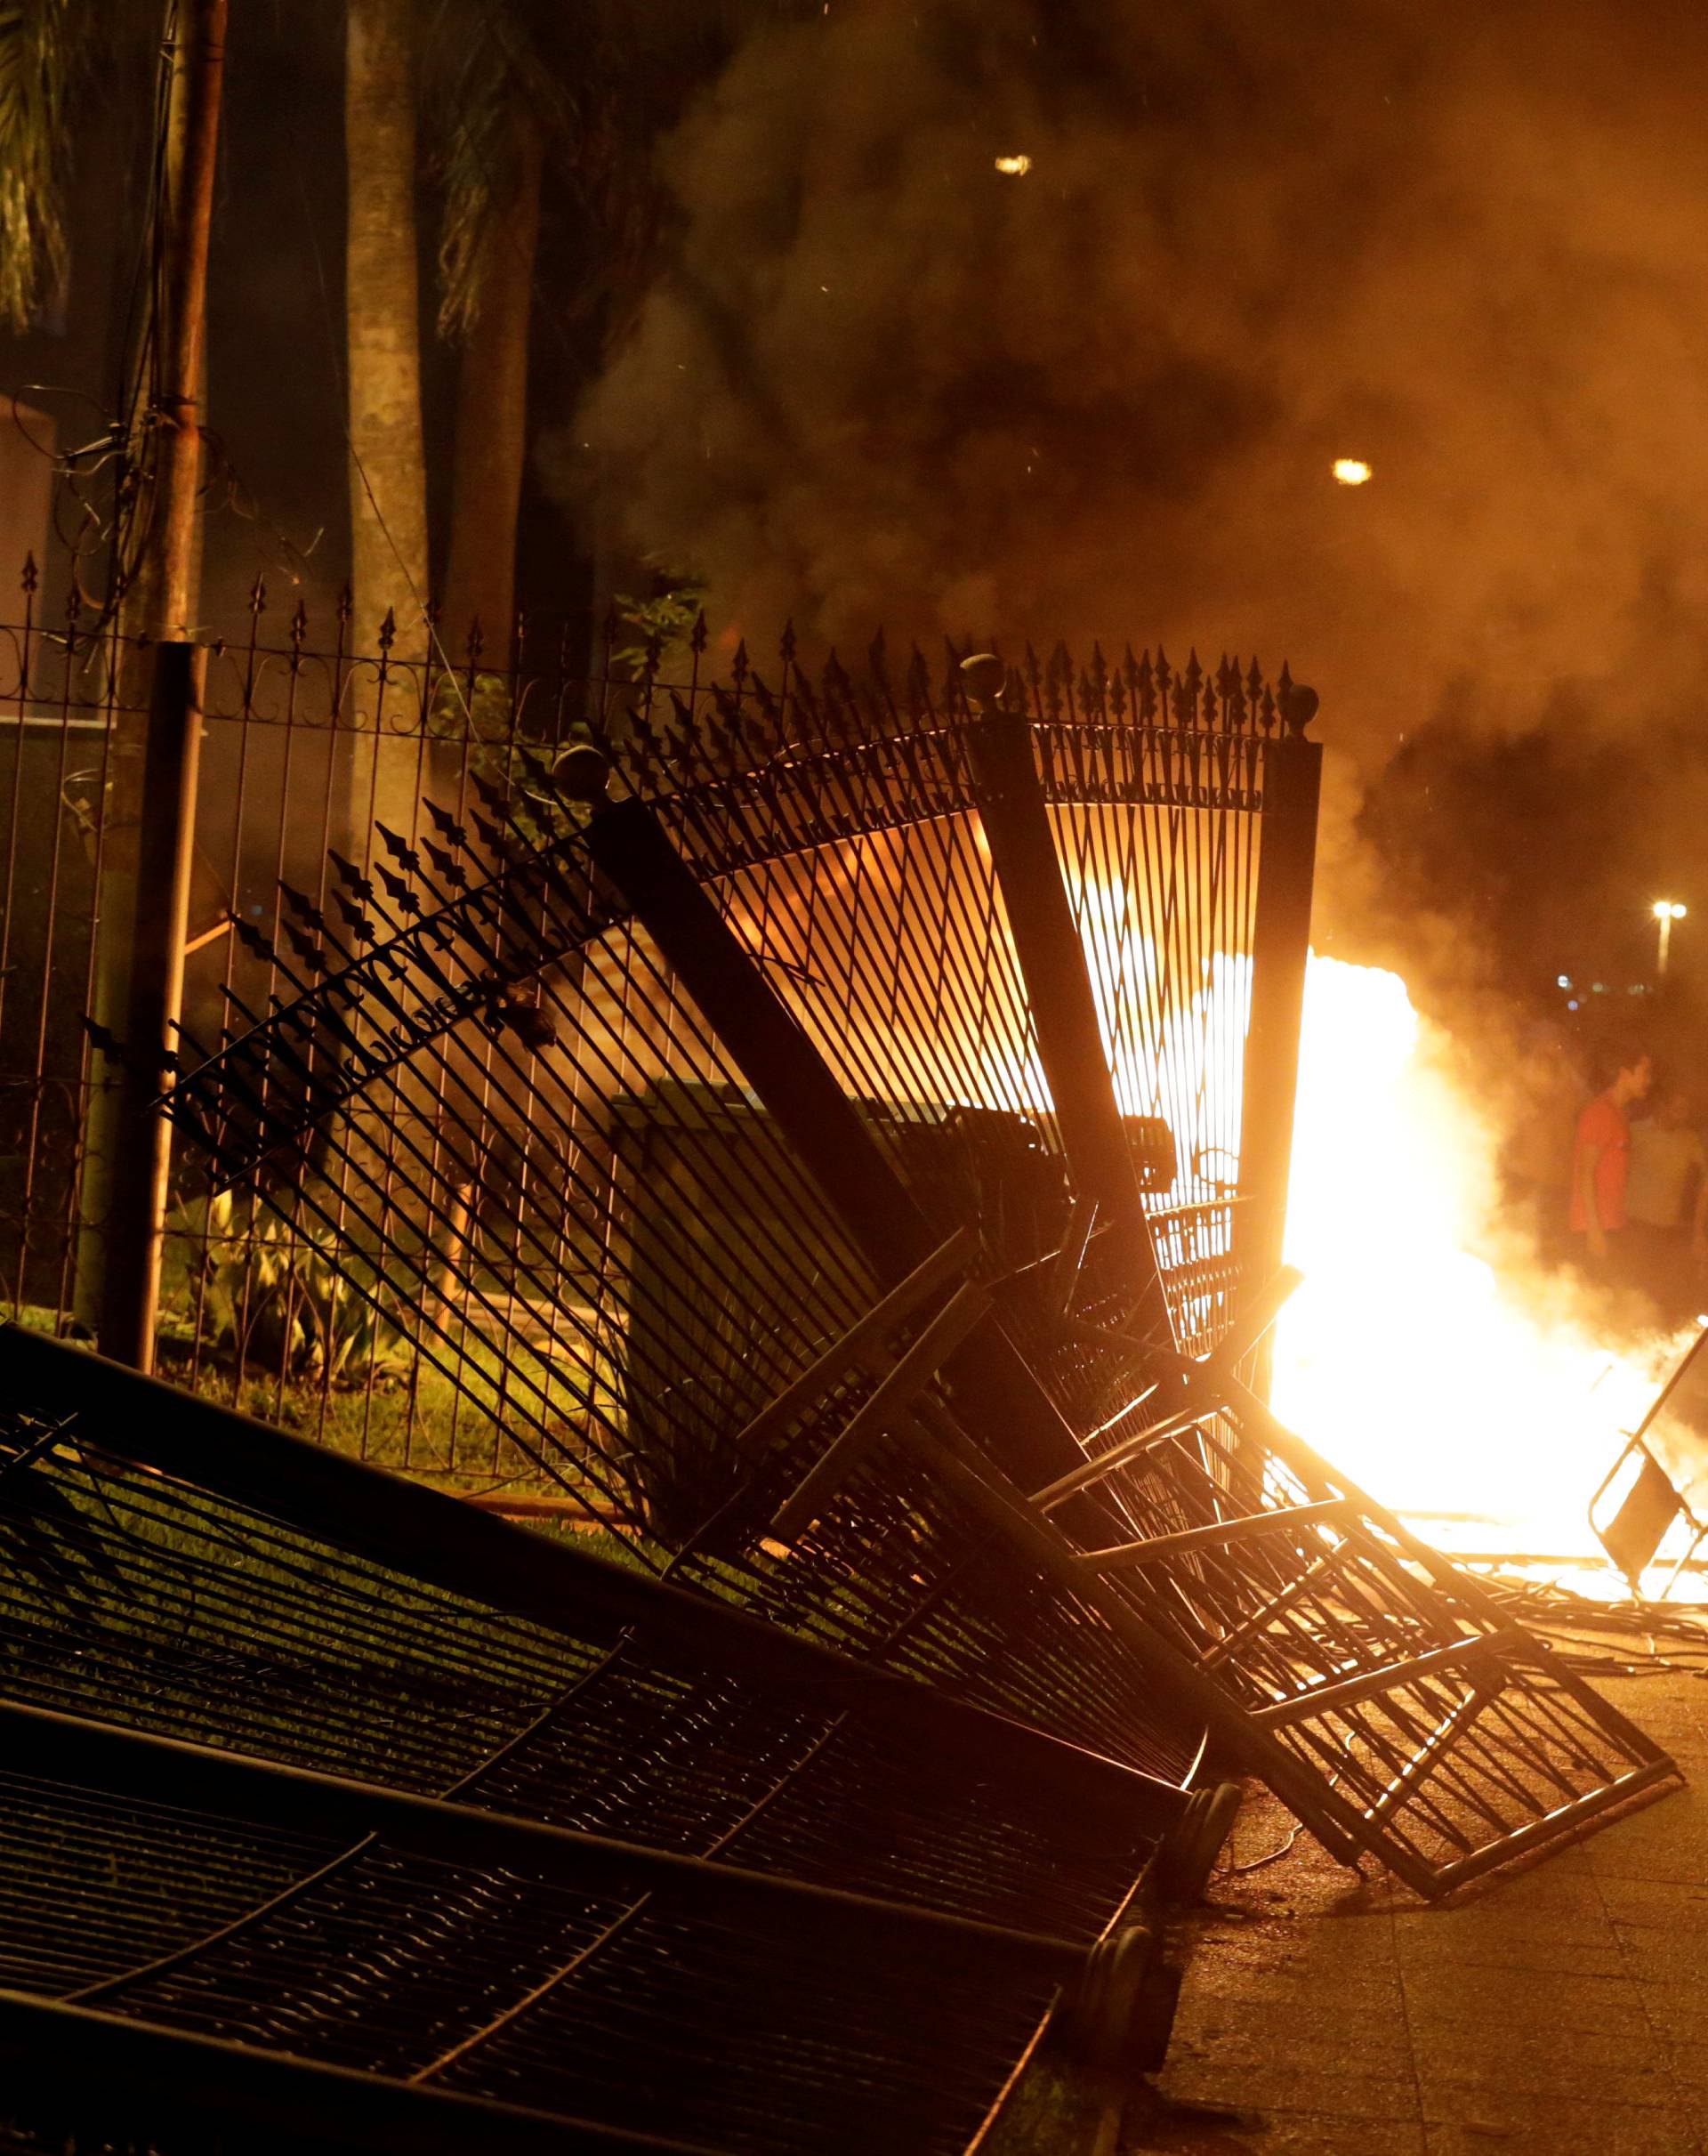 Protestors set fire to the Congress building during a demonstration against a possible change in the law to allow for presidential re-election in Asuncion